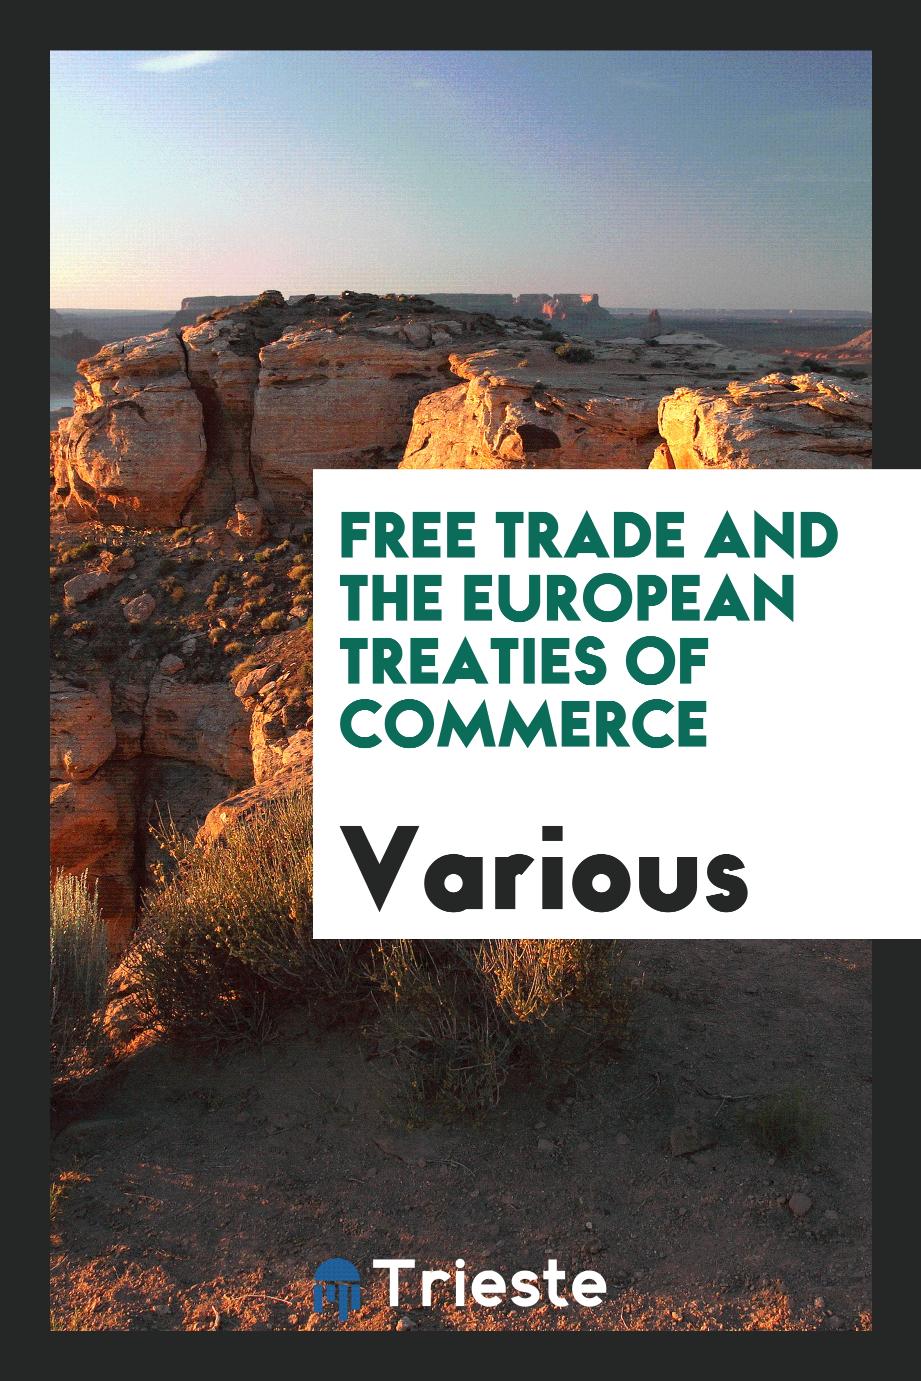 Free Trade and the European Treaties of Commerce